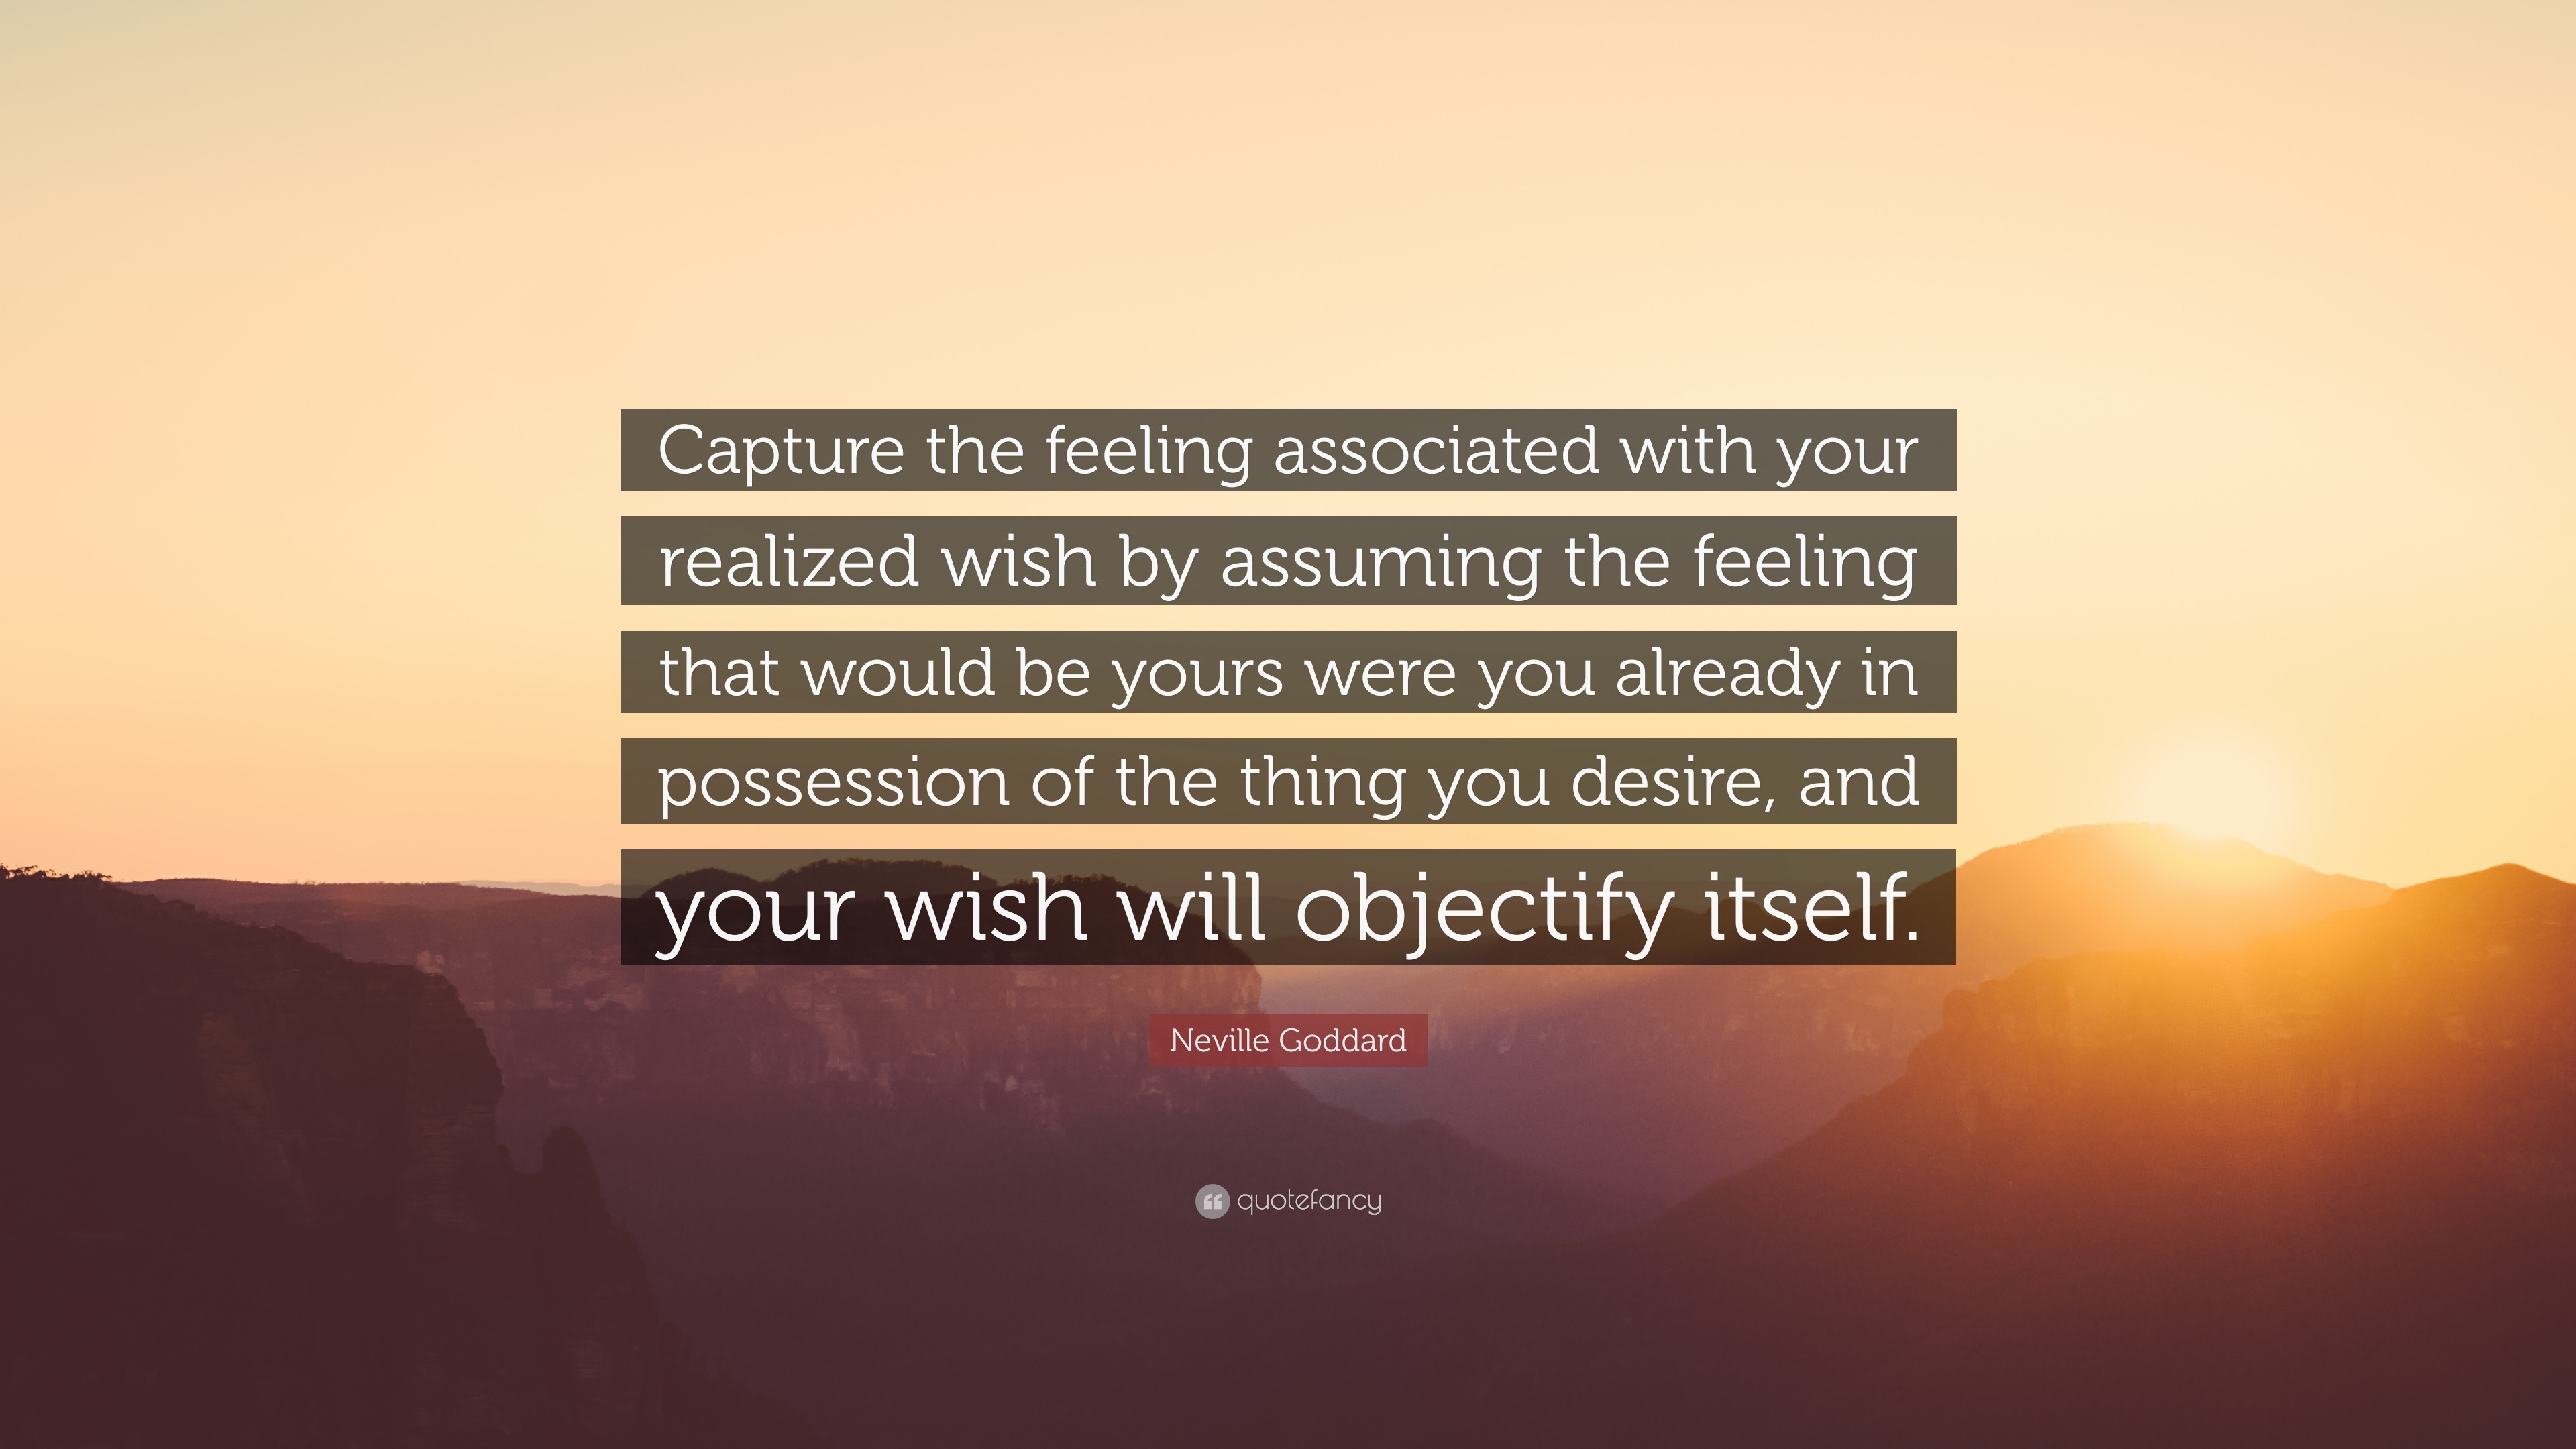 Neville Goddard Quote: “Capture the feeling associated with your realized  wish by assuming the feeling that would be yours were you already in p...”